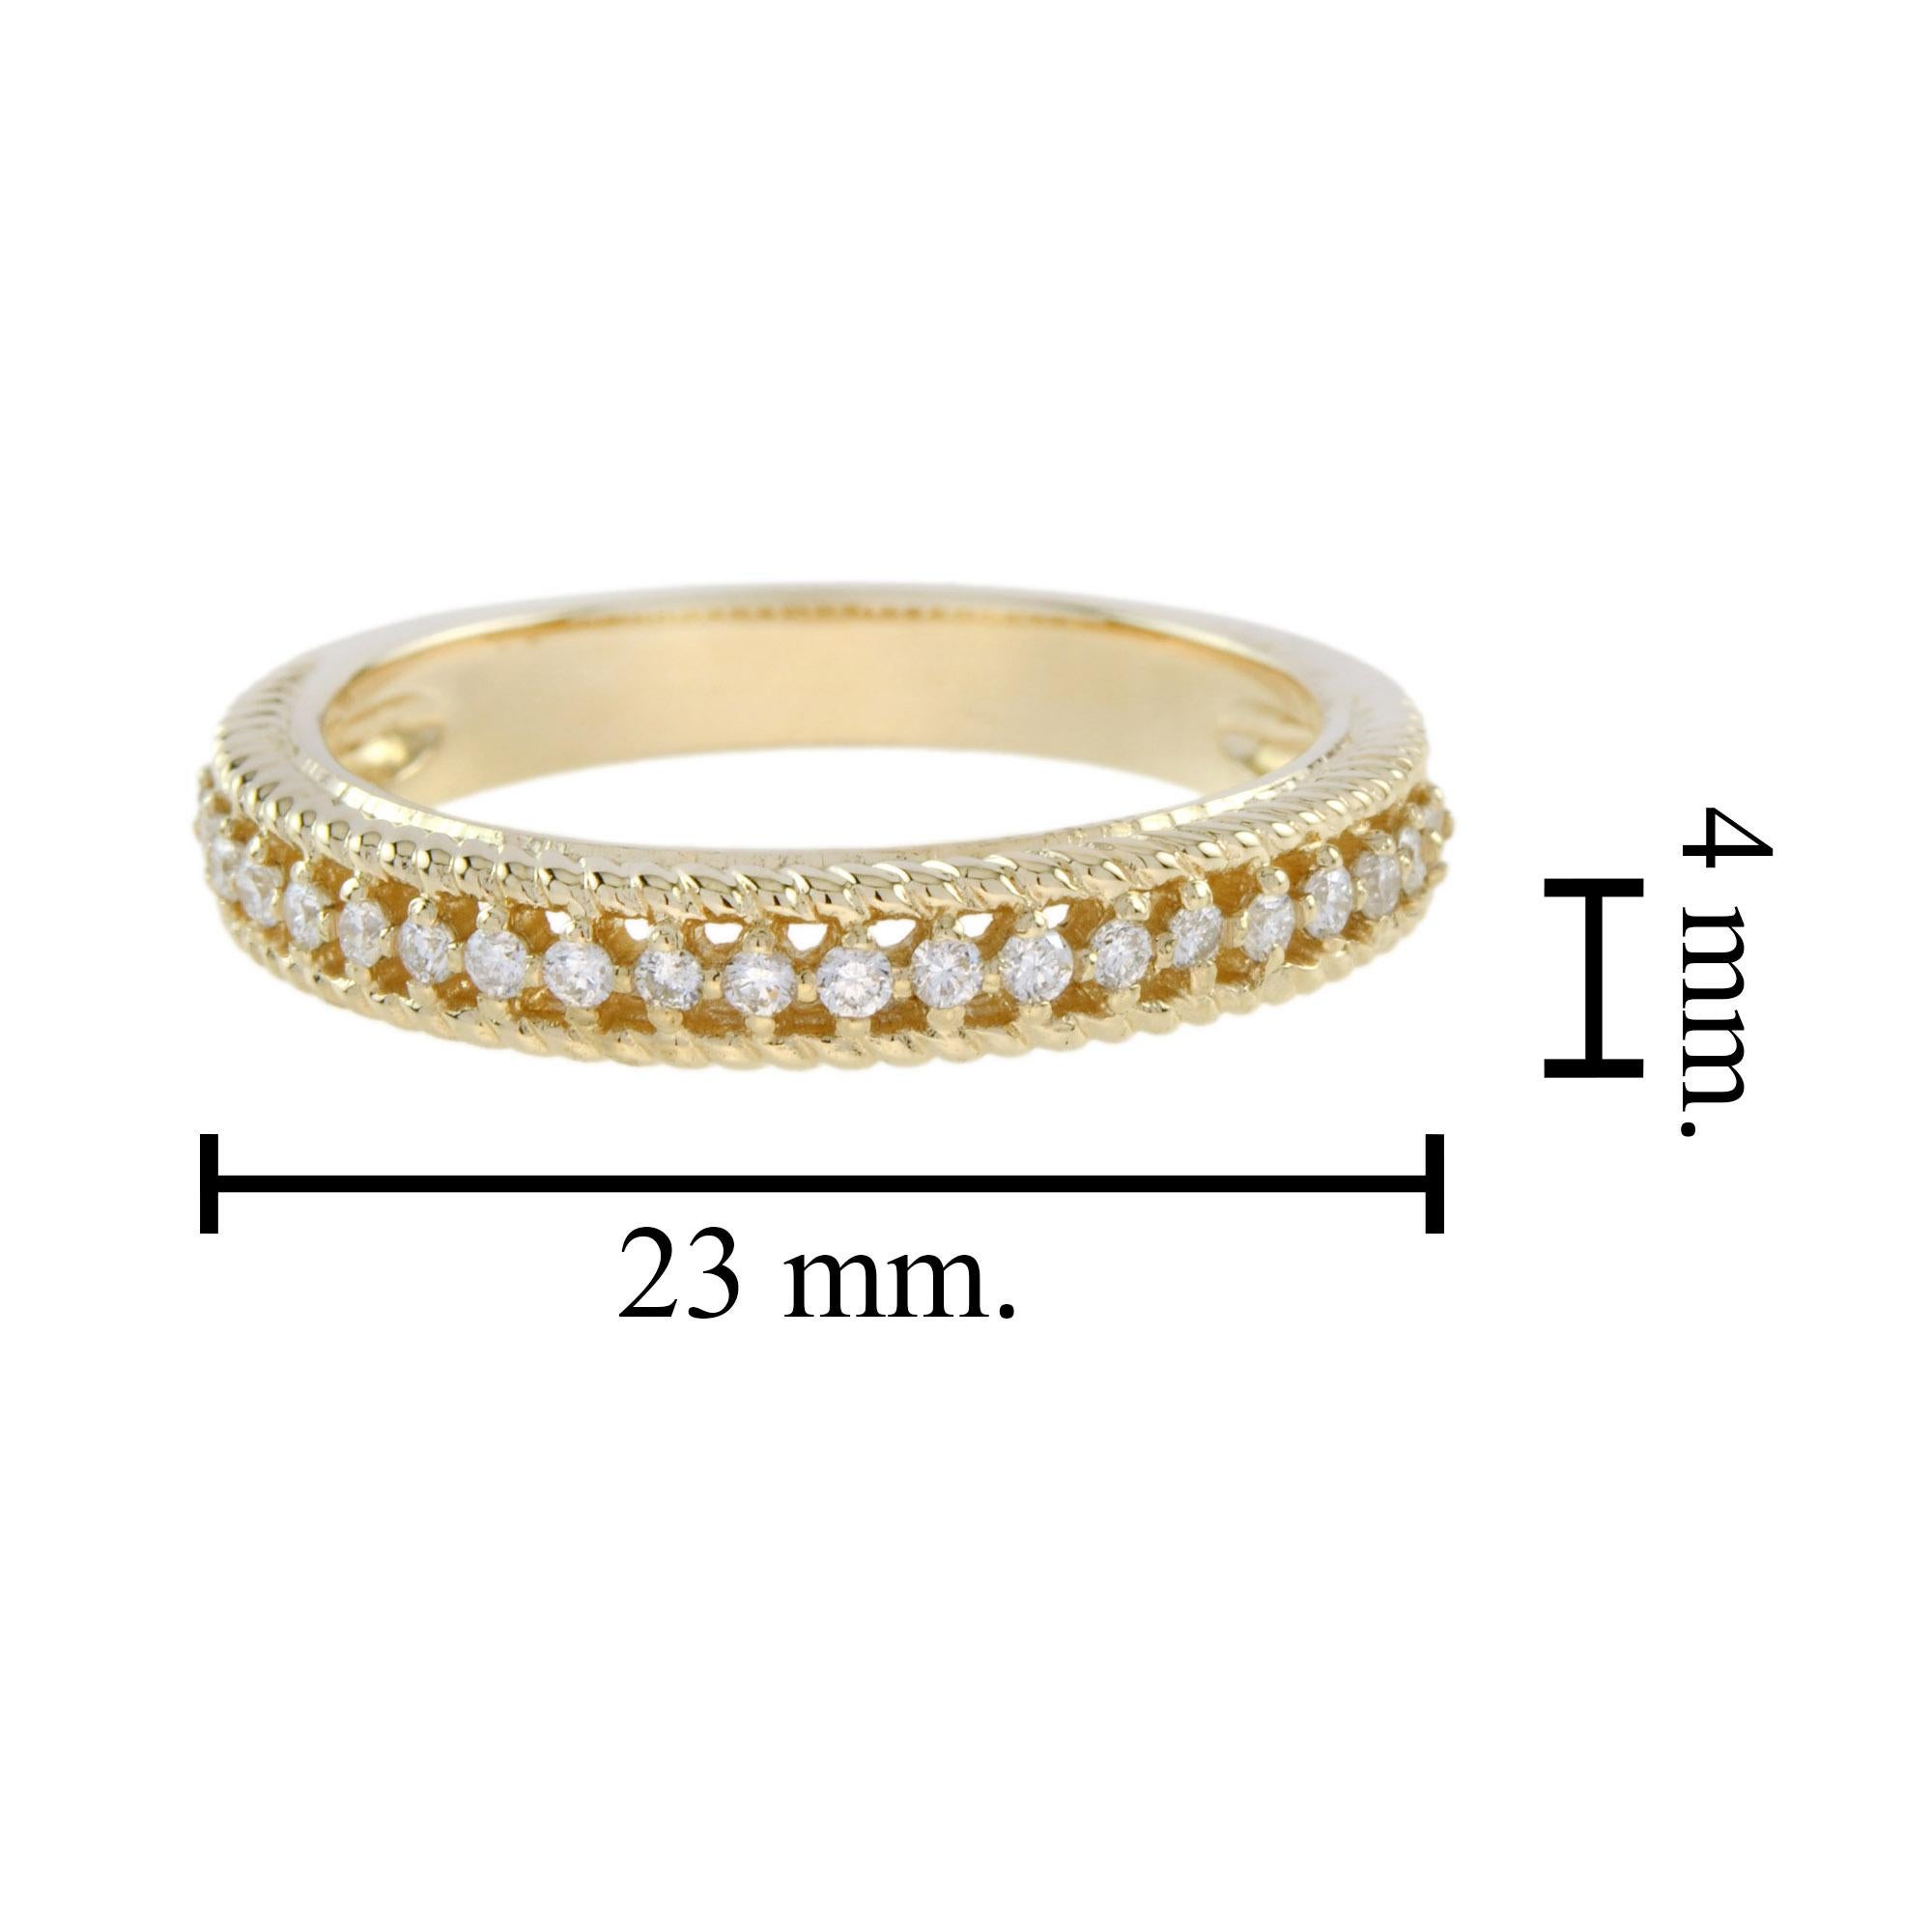 For Sale:  Vintage Style Diamond Half Eternity Wedding Band Ring in 14K Yellow Gold 6